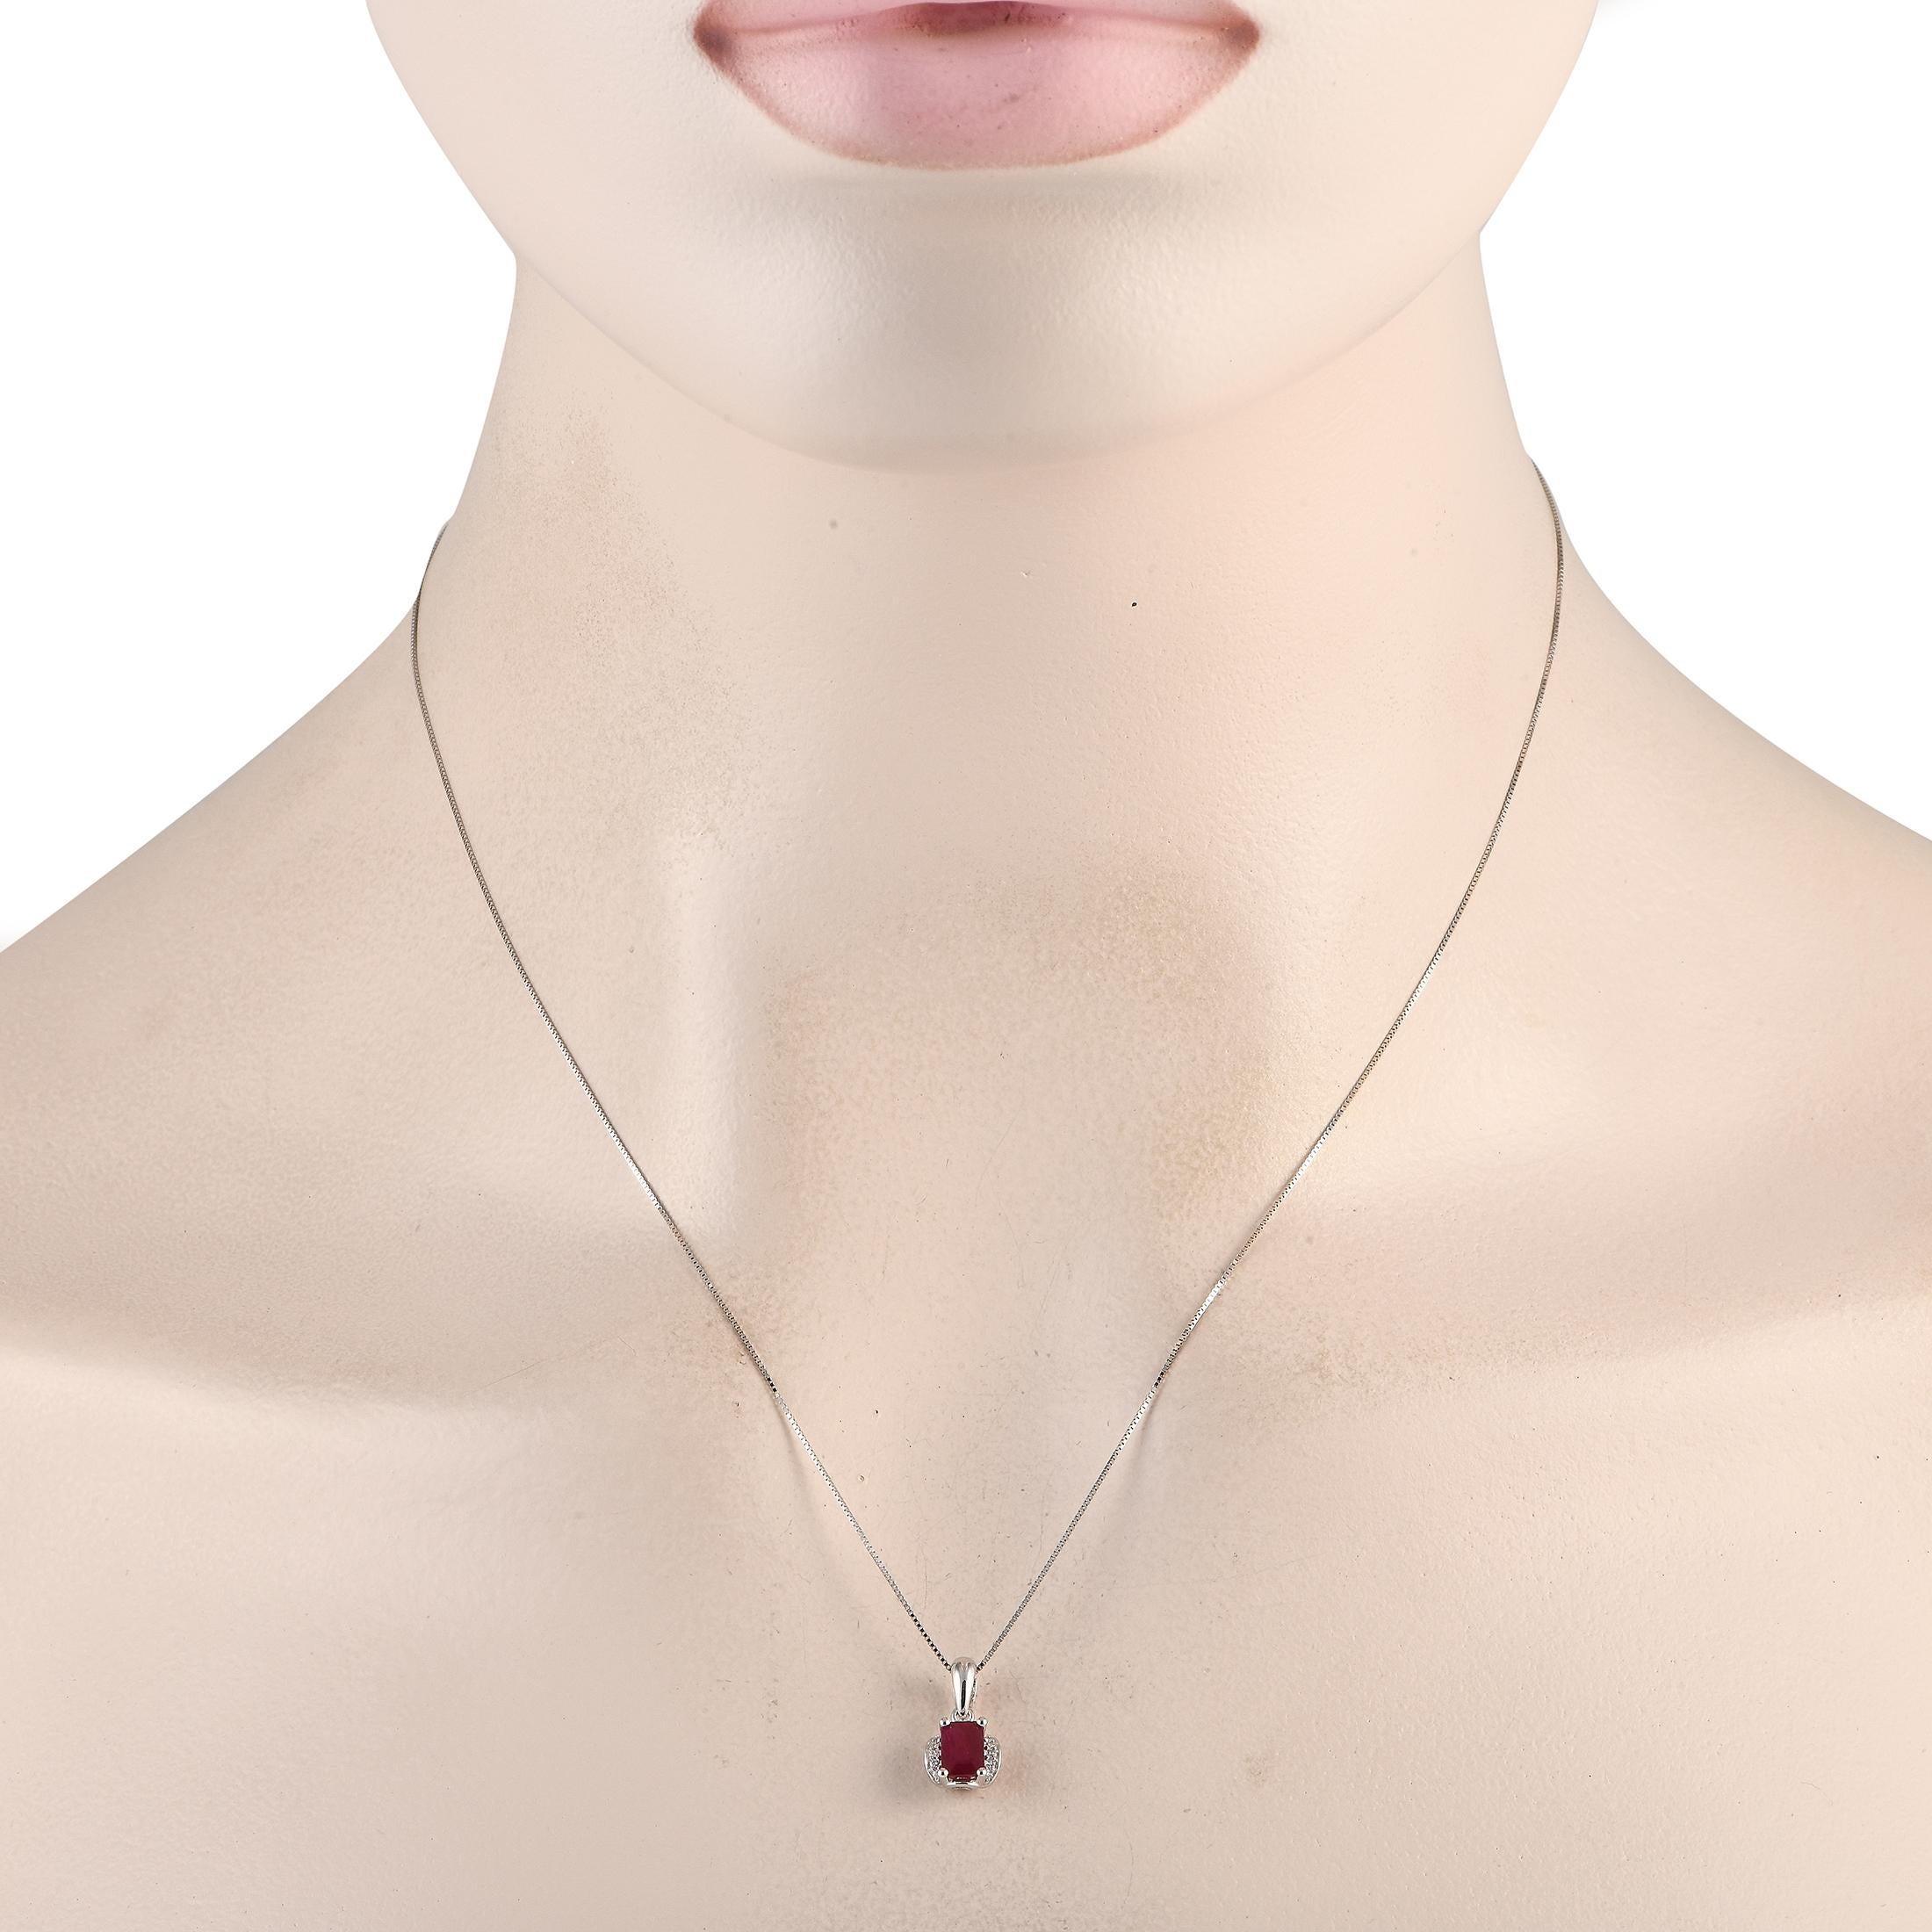 This luxurious necklace is inherently sophisticated. Suspended from a sleek 18 box chain, youll find a 14K White Gold pendant measuring 0.50 long by 0.25 wide. Diamonds with a total weight of 0.03 accent each side of the stunning Ruby center